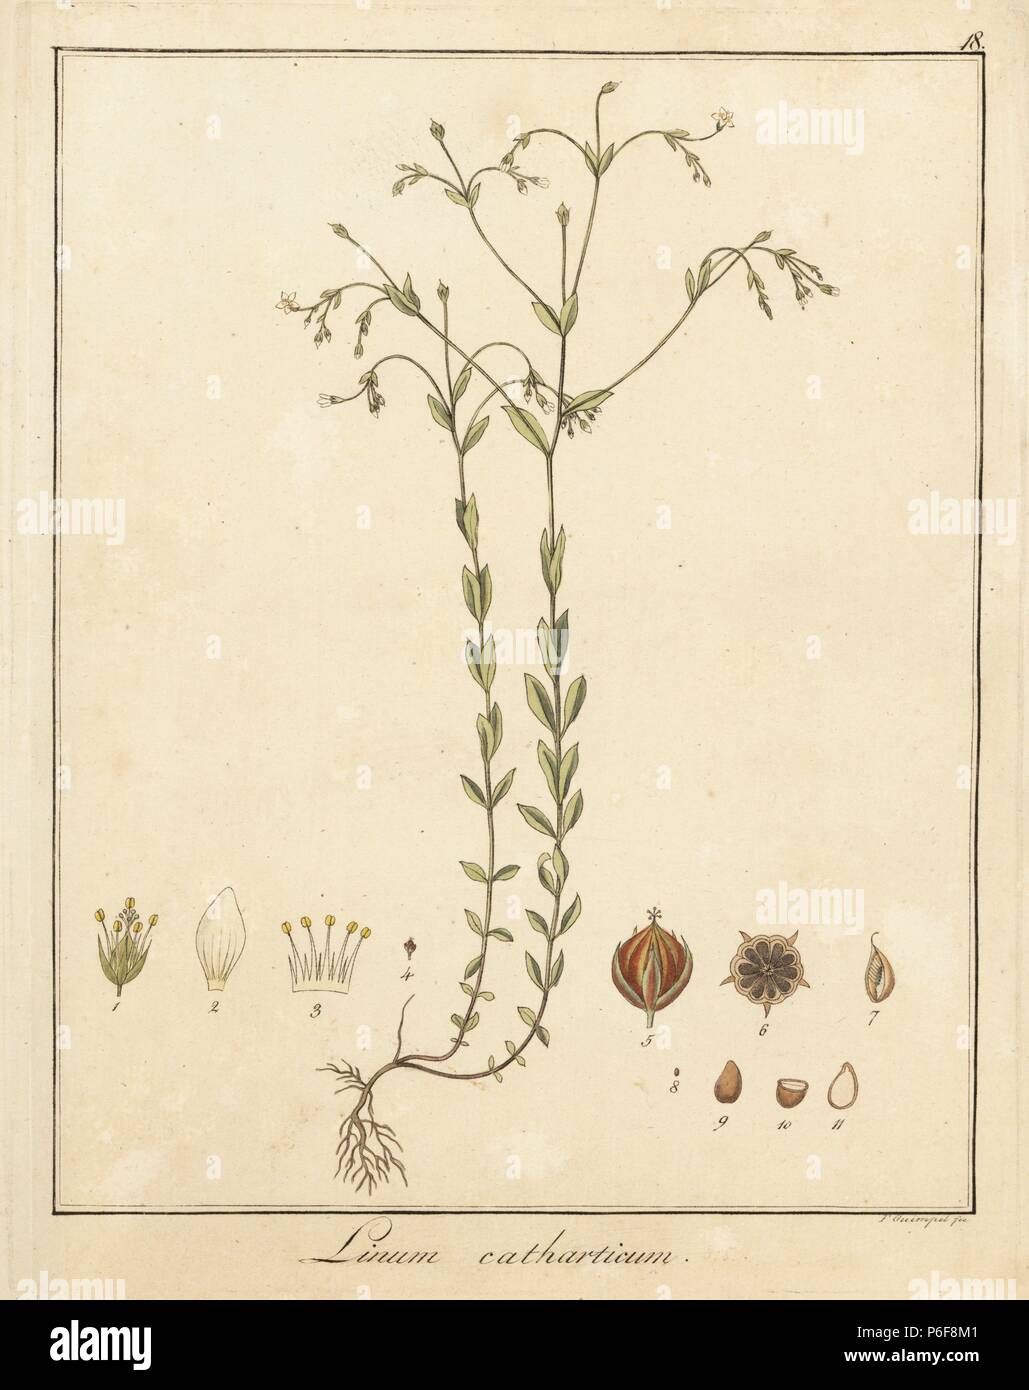 Fairy flax, Linum catharticum. Handcoloured copperplate engraving by F. Guimpel from Dr. Friedrich Gottlob Hayne's Medical Botany, Berlin, 1822. Hayne (1763-1832) was a German botanist, apothecary and professor of pharmaceutical botany at Berlin University. Stock Photo